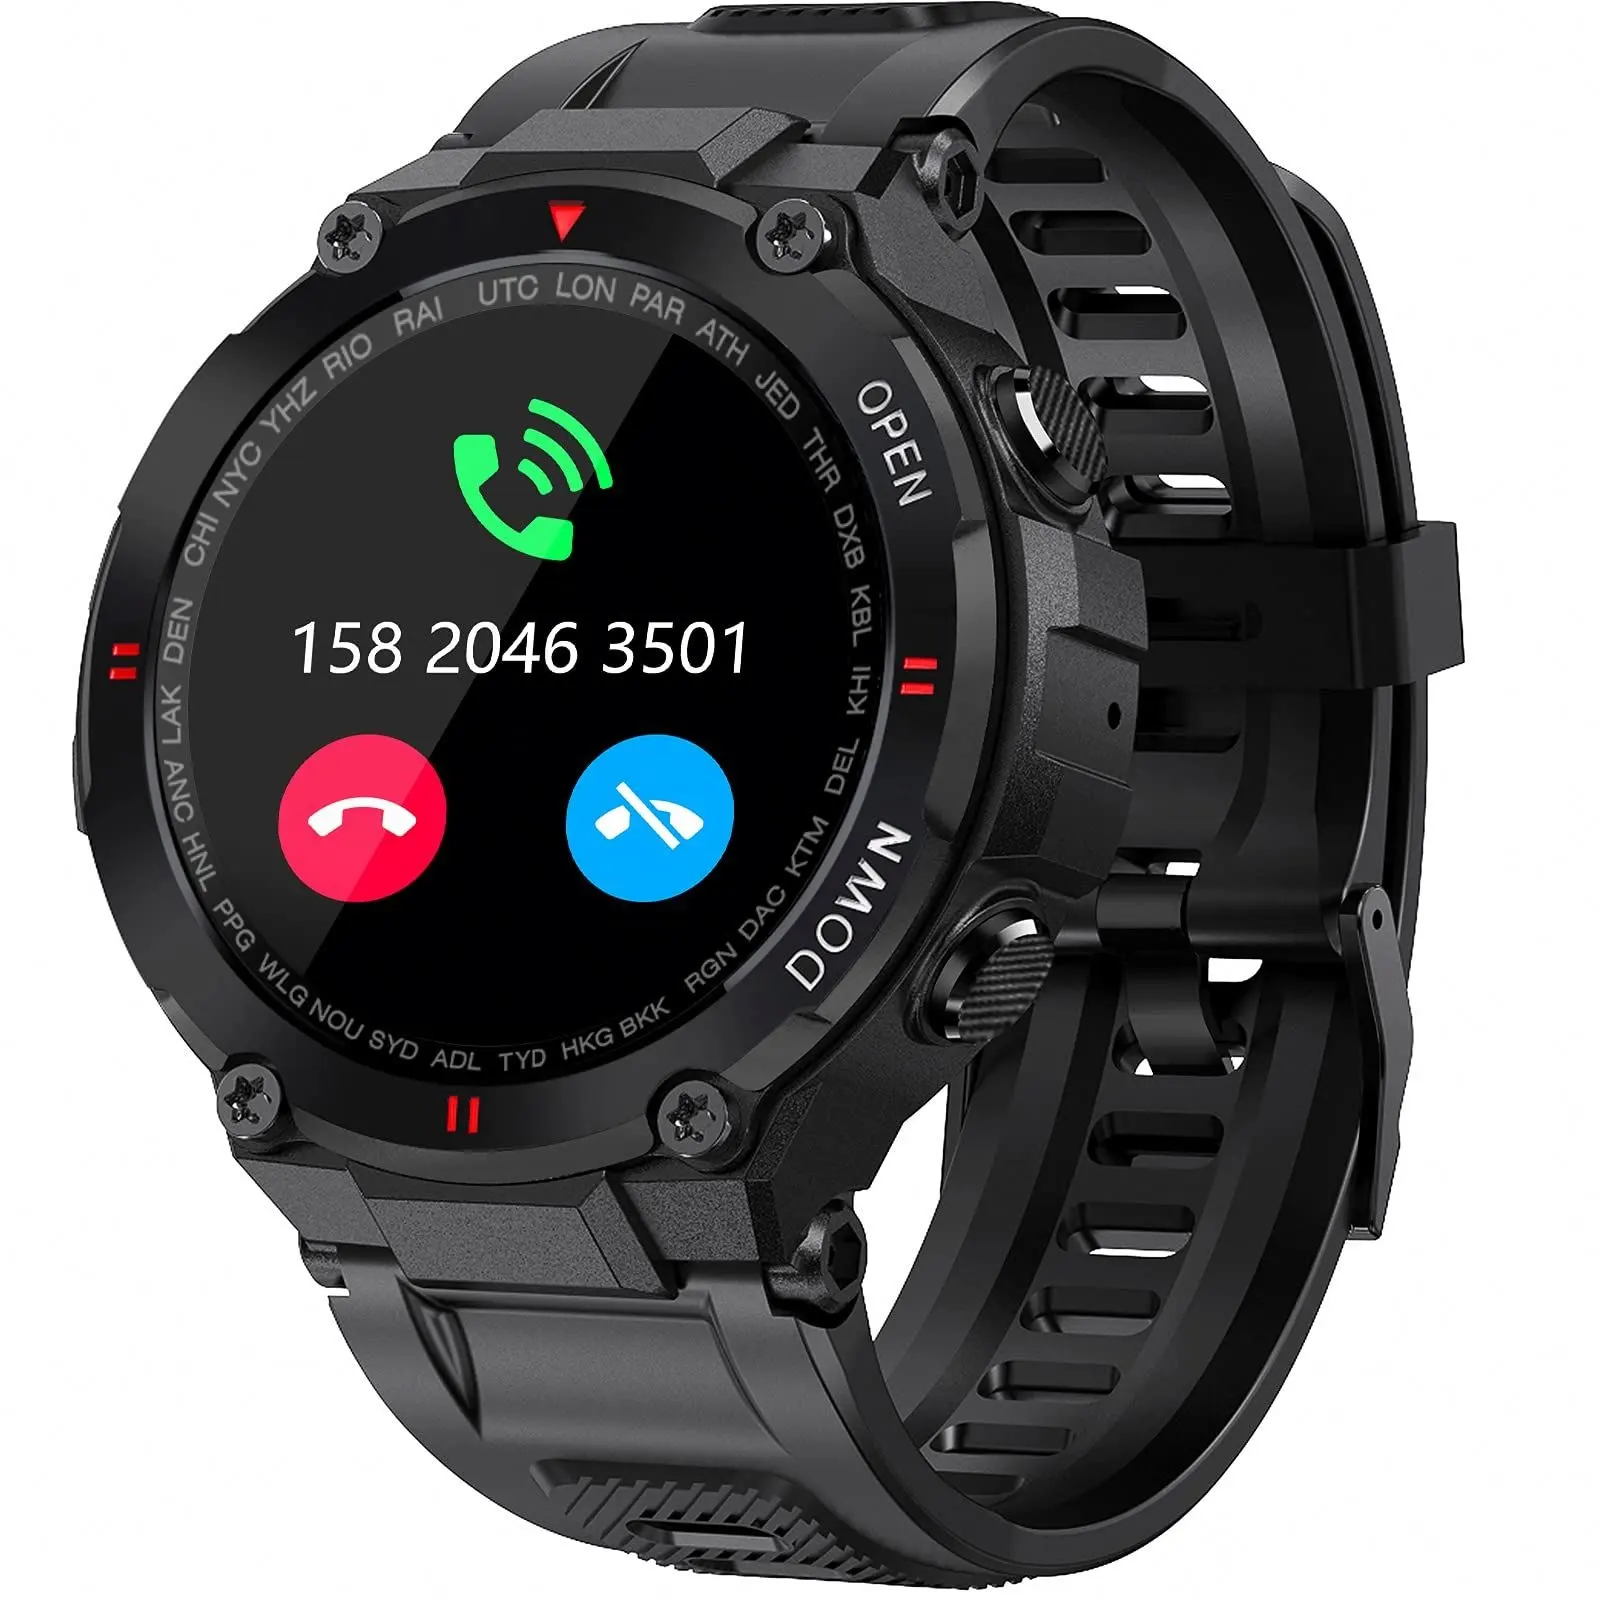 2022 K22 Direct factory phone call inteligente reloj digital android smart watch smartwatches for men smart watch mobile phones